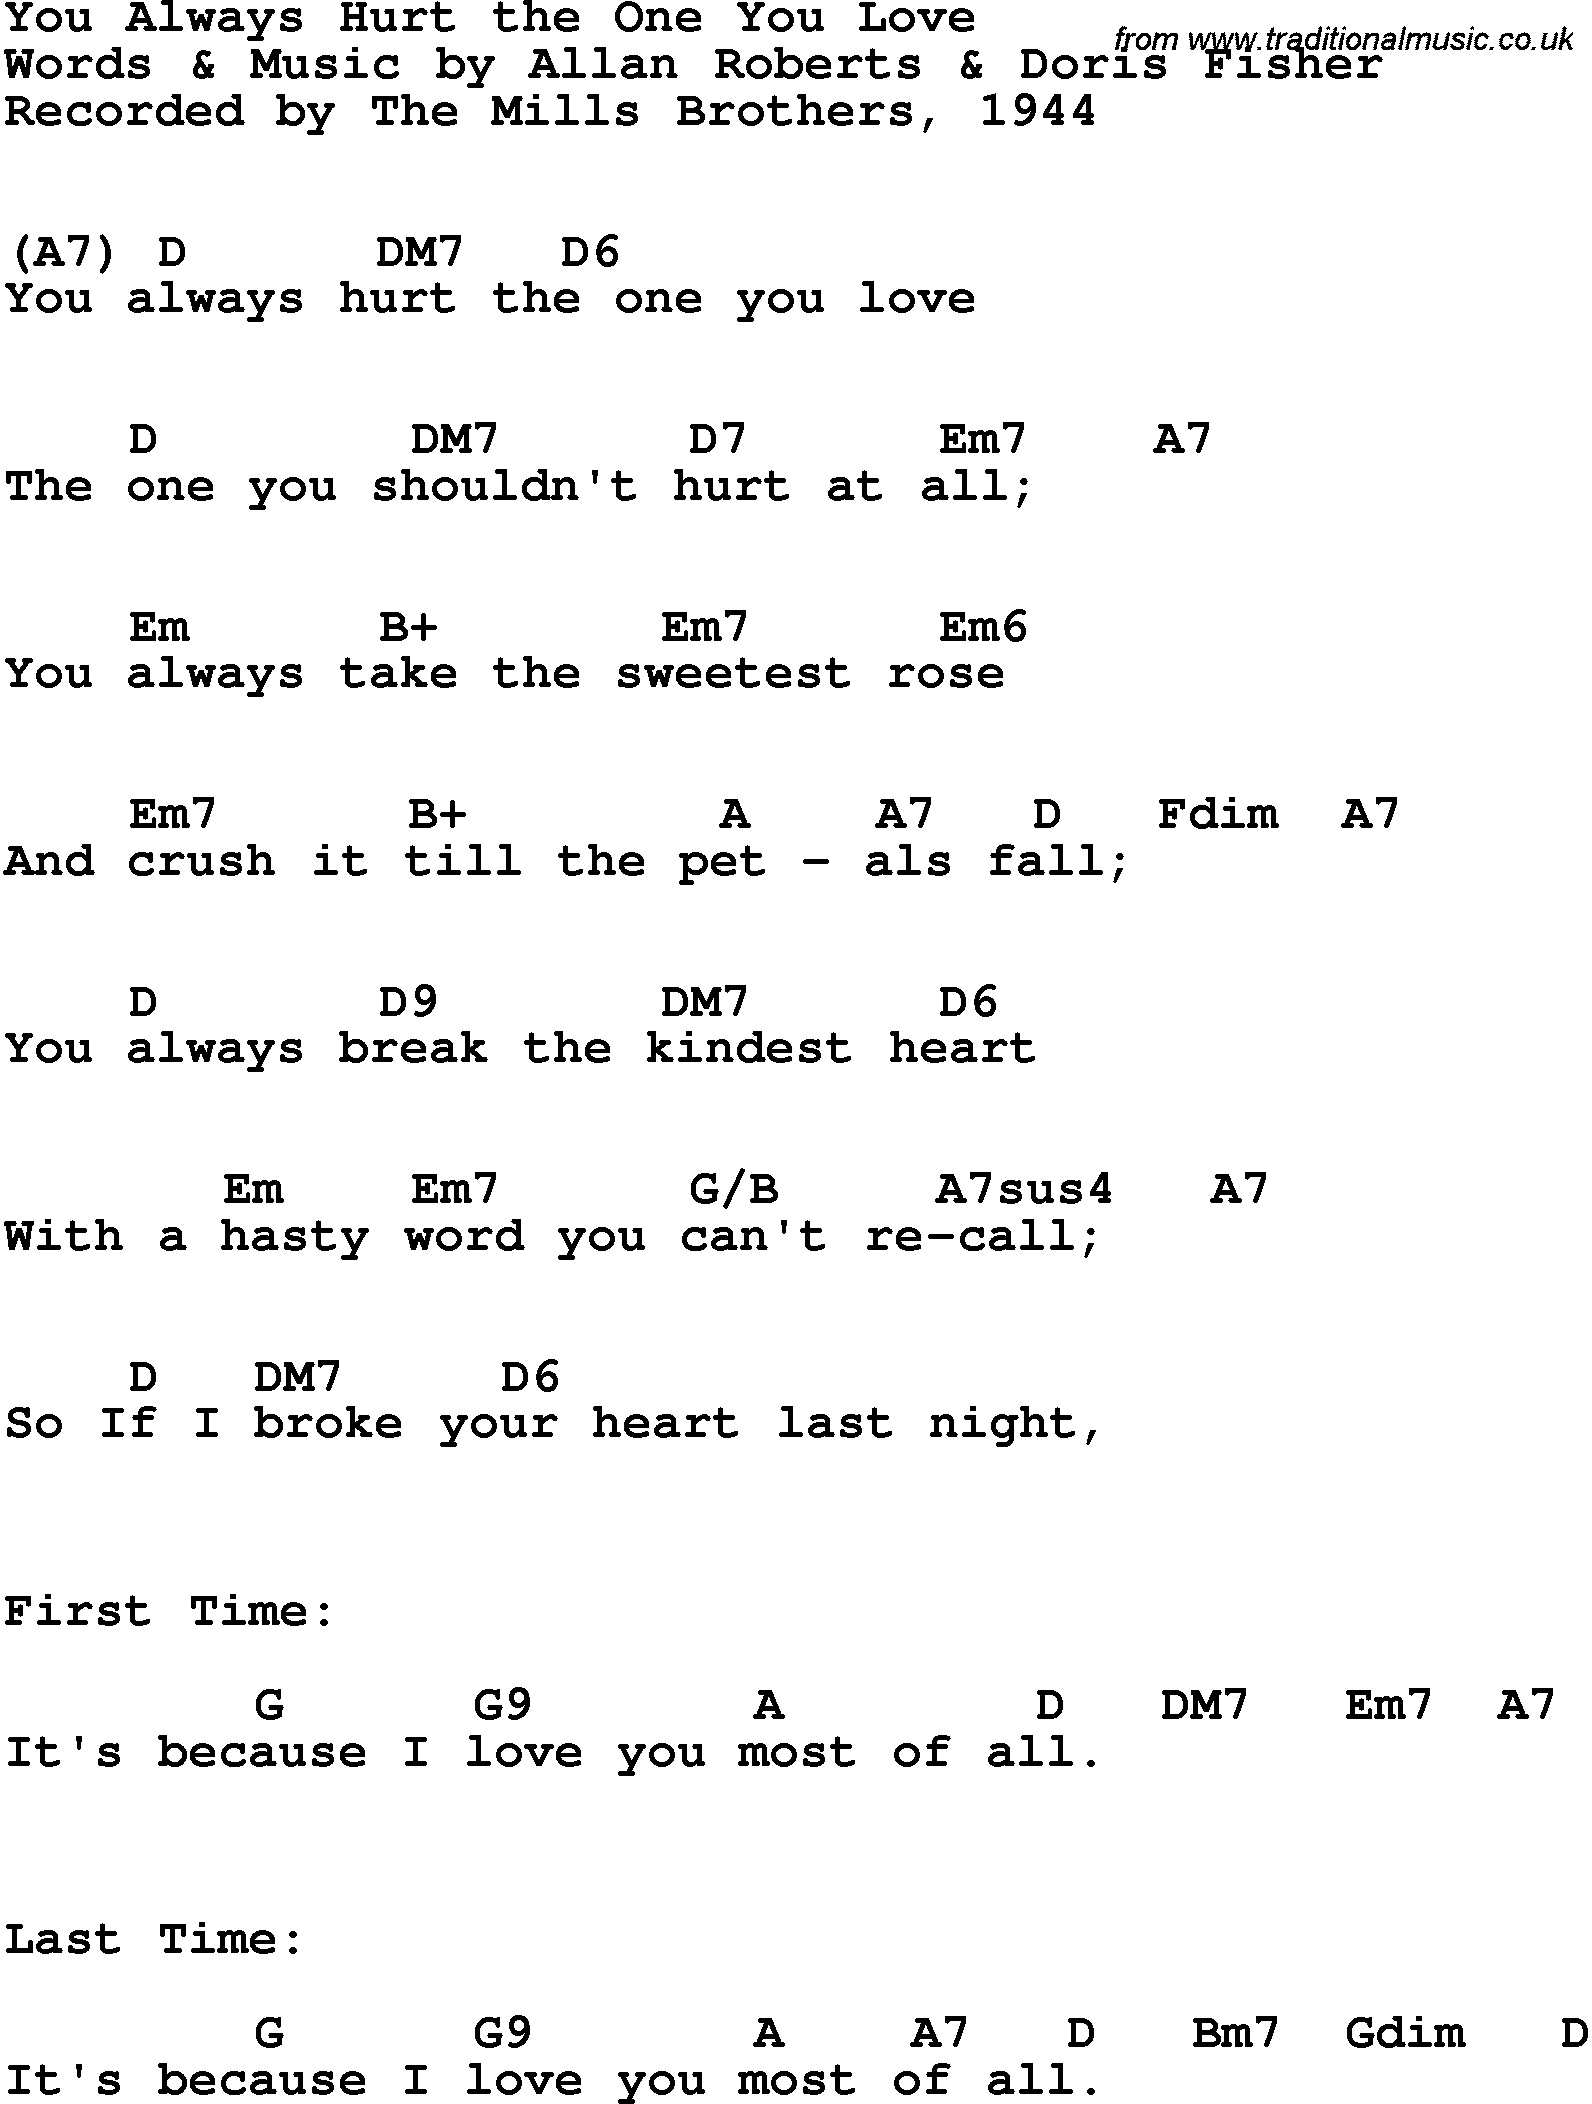 Song Lyrics with guitar chords for You Always Hurt The One You Love - The Mills Brothers, 1944